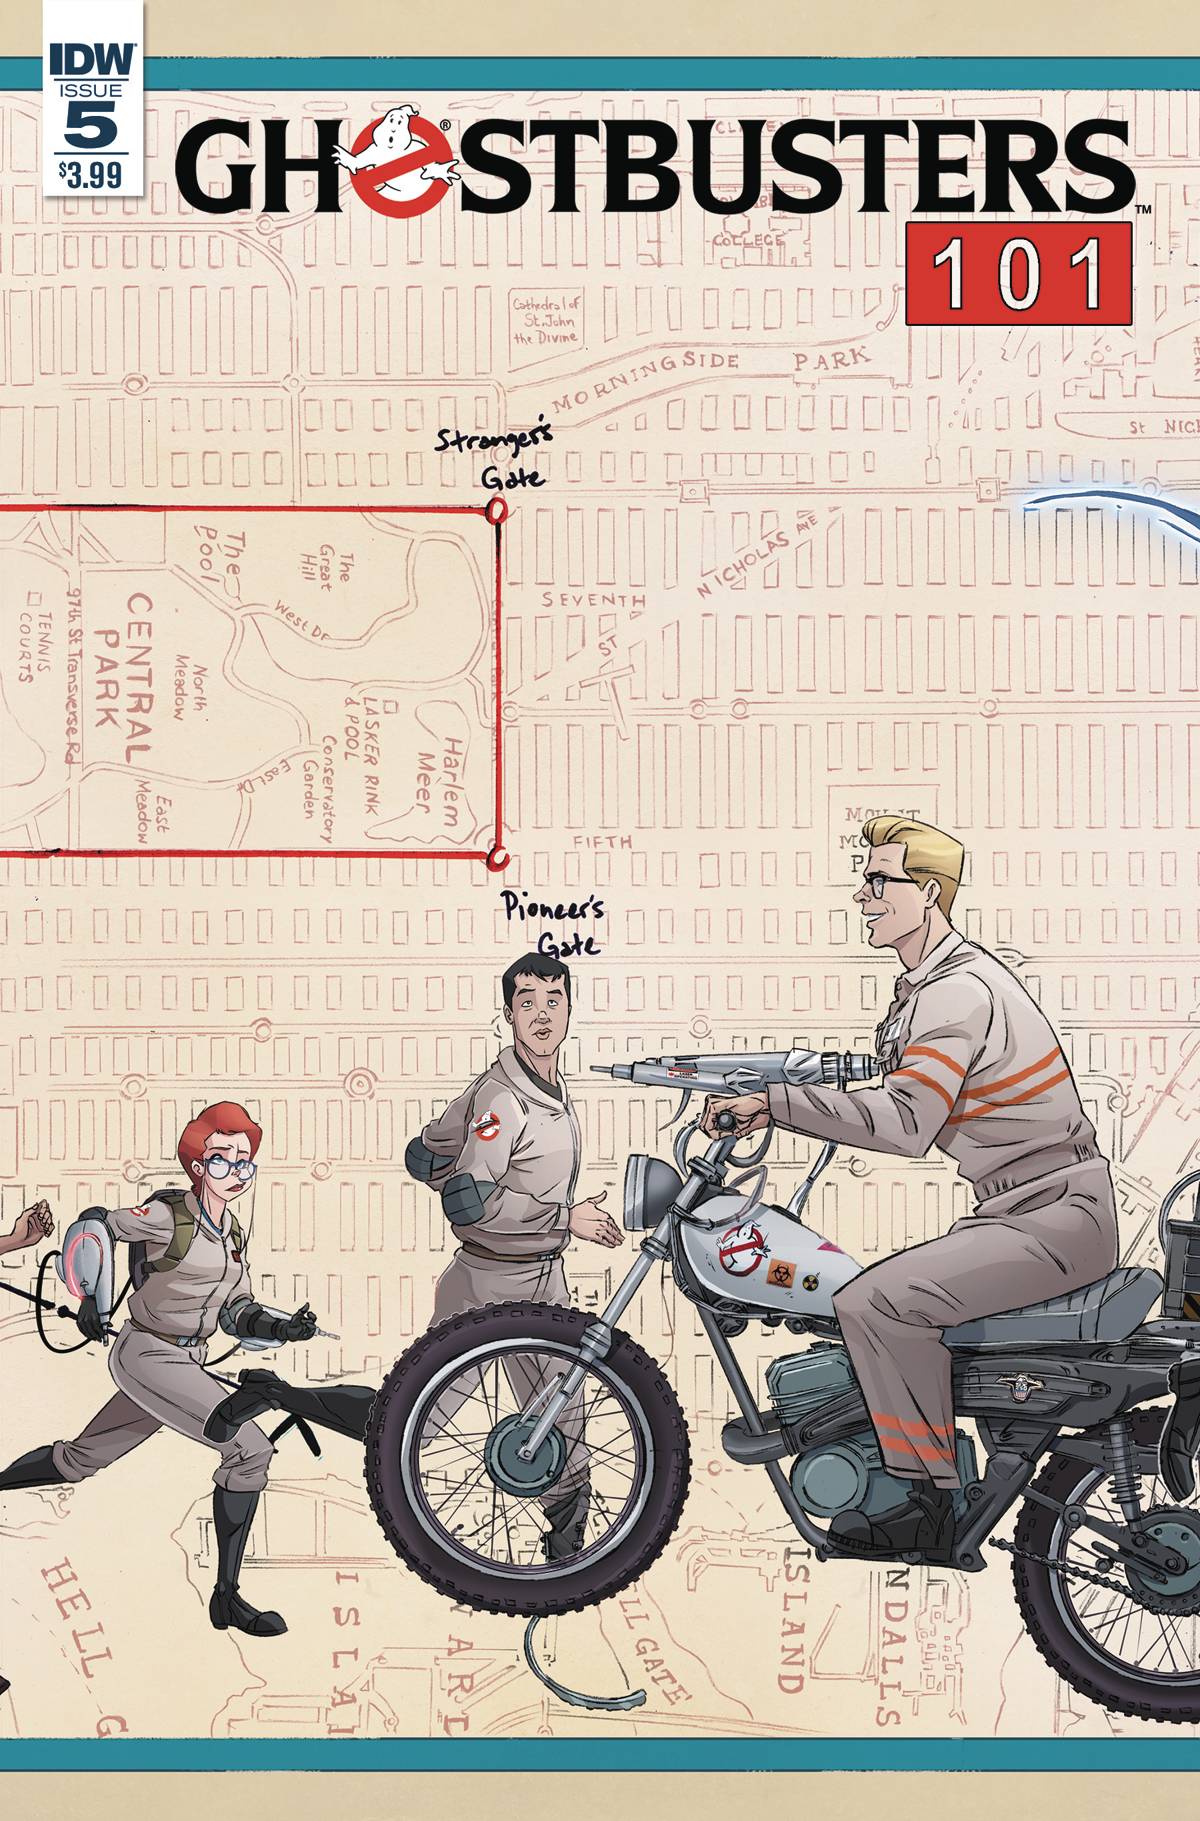 GHOSTBUSTERS 101#5